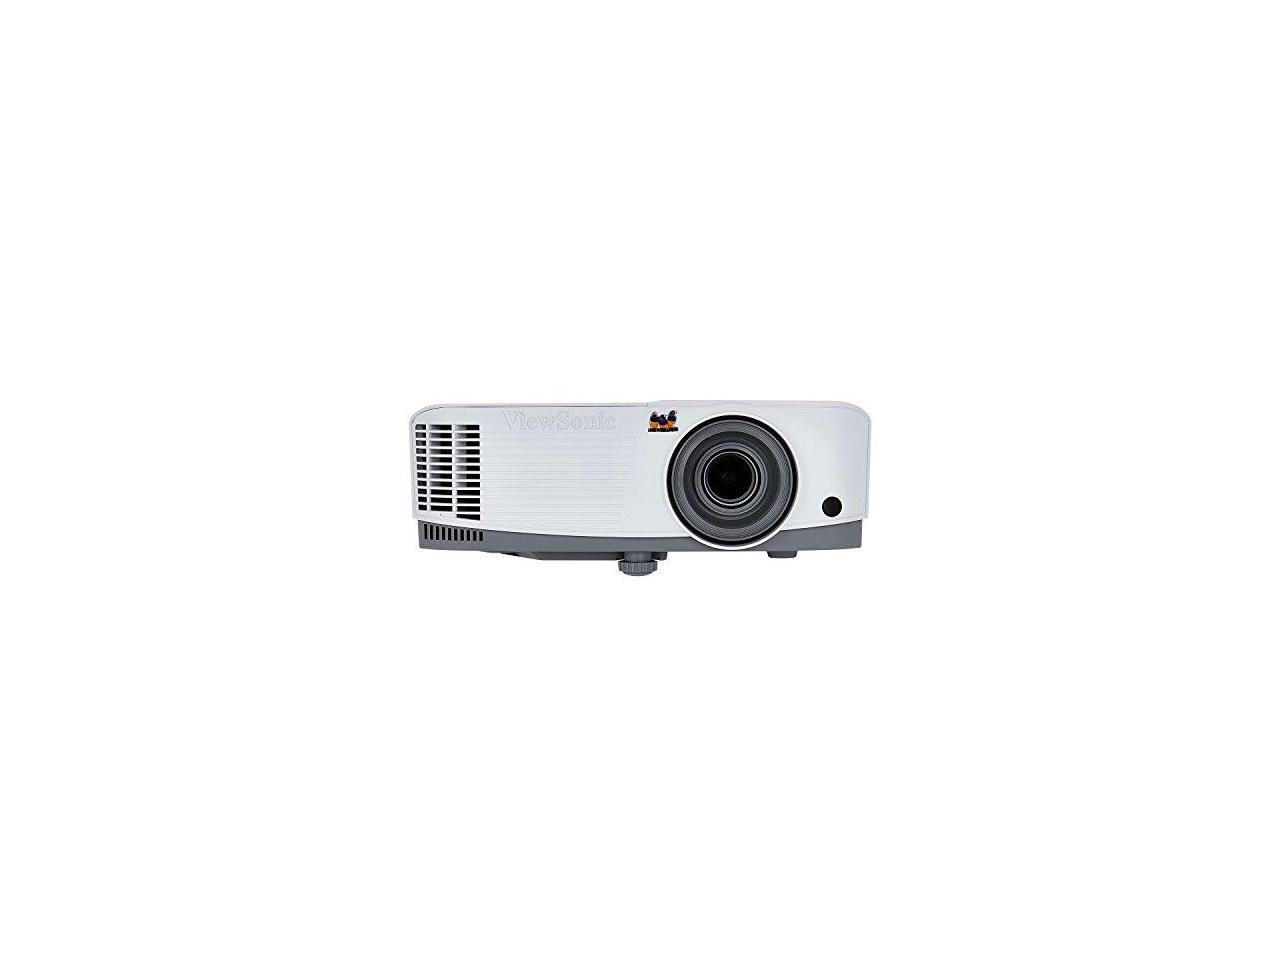 White ViewSonic PG603X 3600 Lumens XGA Networkable Home and Office Projector with HDMI and USB